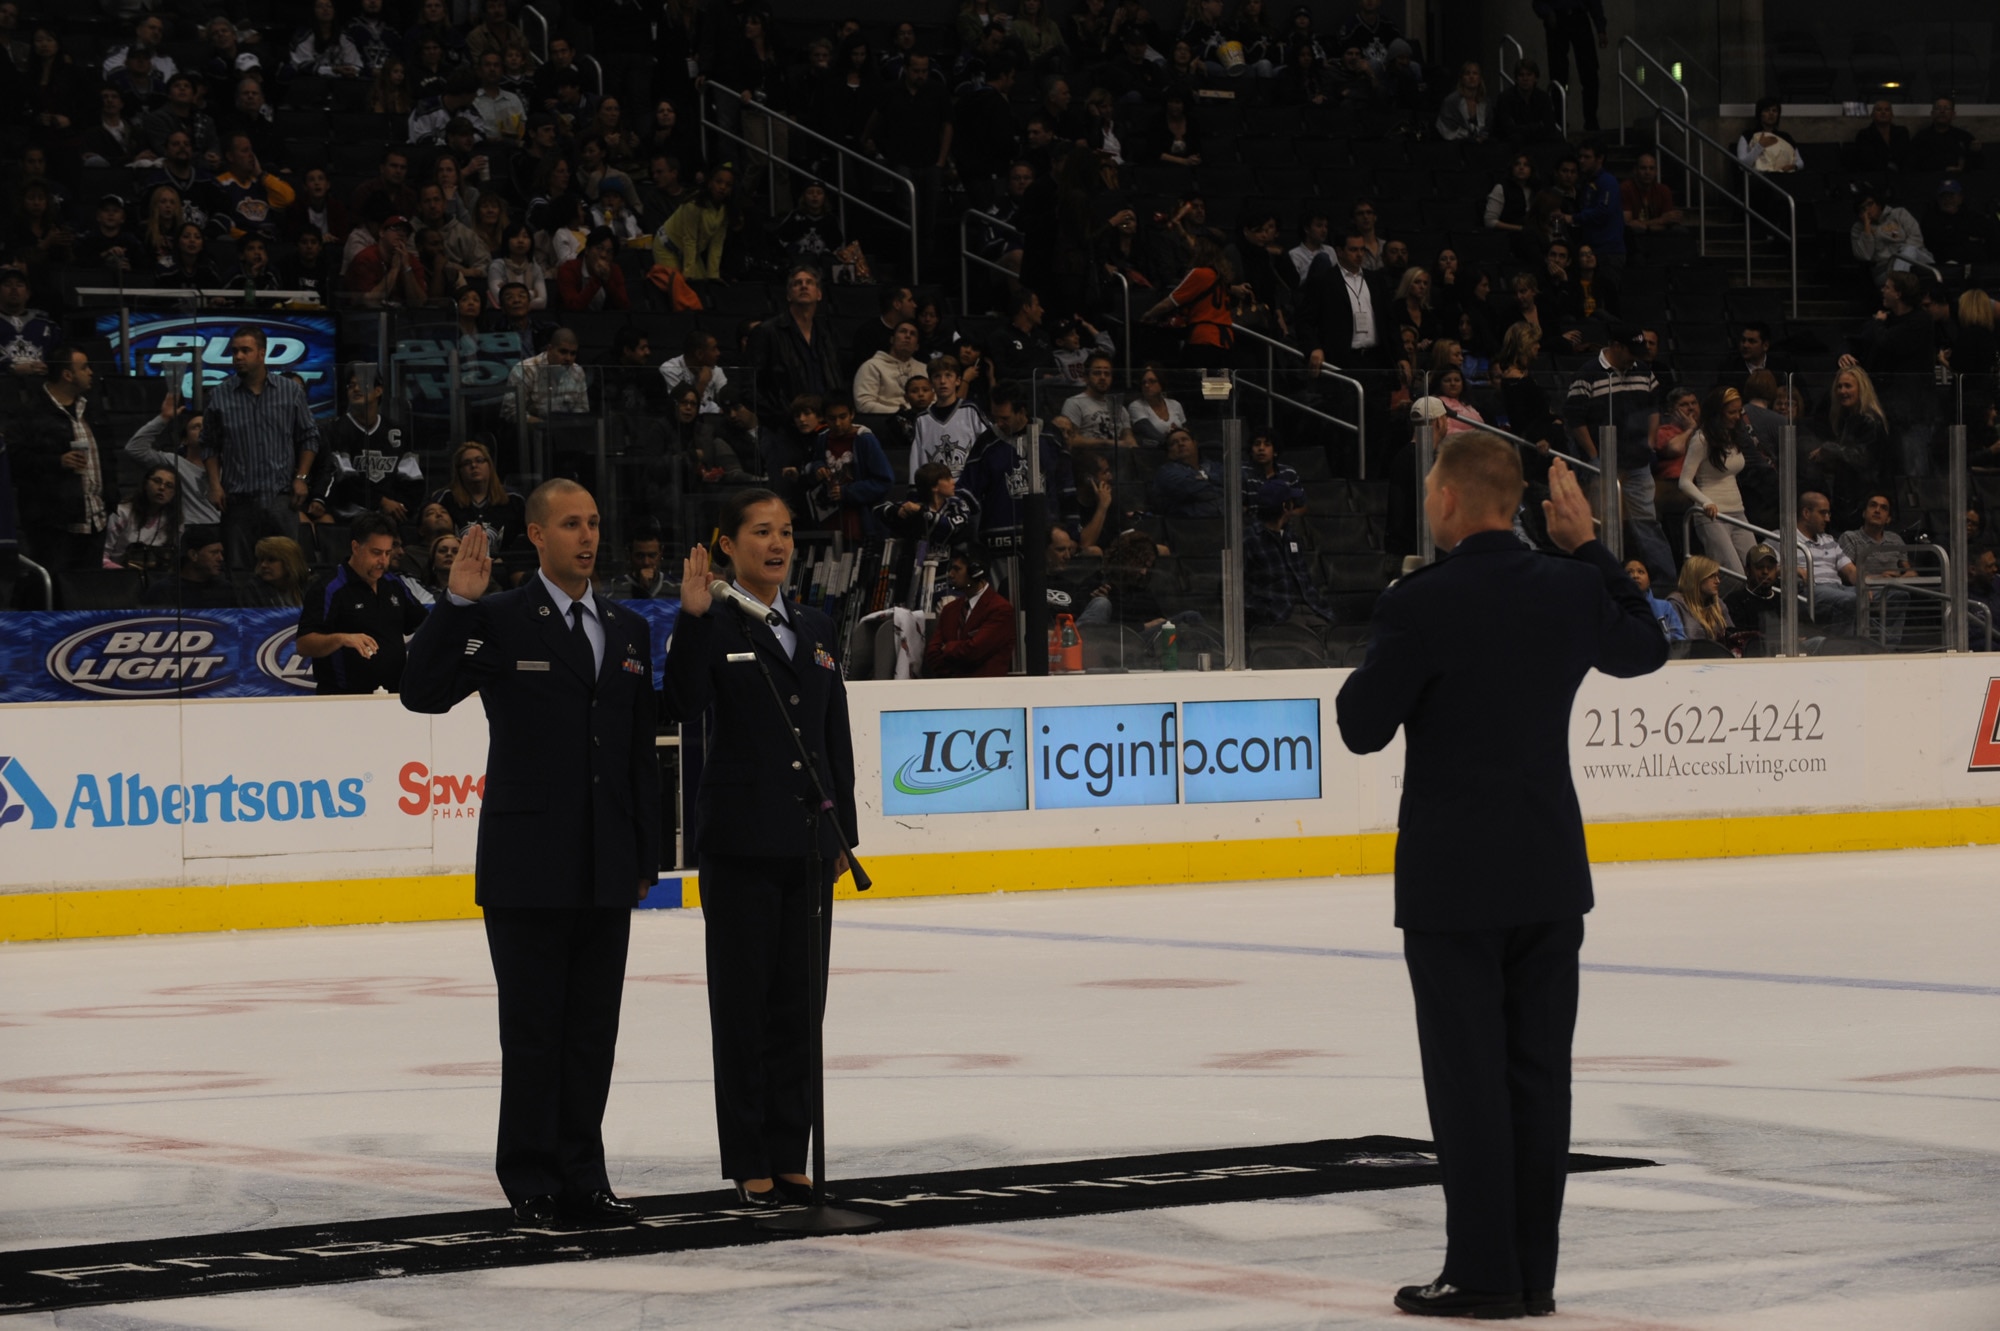 Col. John Odey swears in Tech. Sgt. Surita Rorie and Staff Sgt. Robert Coddington on the ice of the Staples Center, Los Angeles, Calif., Nov. 15. Sergeants Rorie and Coddington reenlisted during a Los Angeles Kings vs. Nashville Predator game as part of Air Force Week Los Angeles. Colonel Odey is the 95th Communications Group Commander, Edwards Air Force Base, Calif. Sergeants Rorie and Coddington are stationed at Edwards Air Force Base, Calif. Air Force Week Los Angeles is an event designed to educate the local population about the Air Force's capabilities and missions through various activities and exhibitions all over the Los Angeles area. It provides an up close and personal look at the men and women of the Air Force serving worldwide in the defense of freedom. Air Force Week Los Angeles runs from Nov. 14 to 21.  (U.S. Air Force photo/Staff Sgt. Desiree N. Palacios)